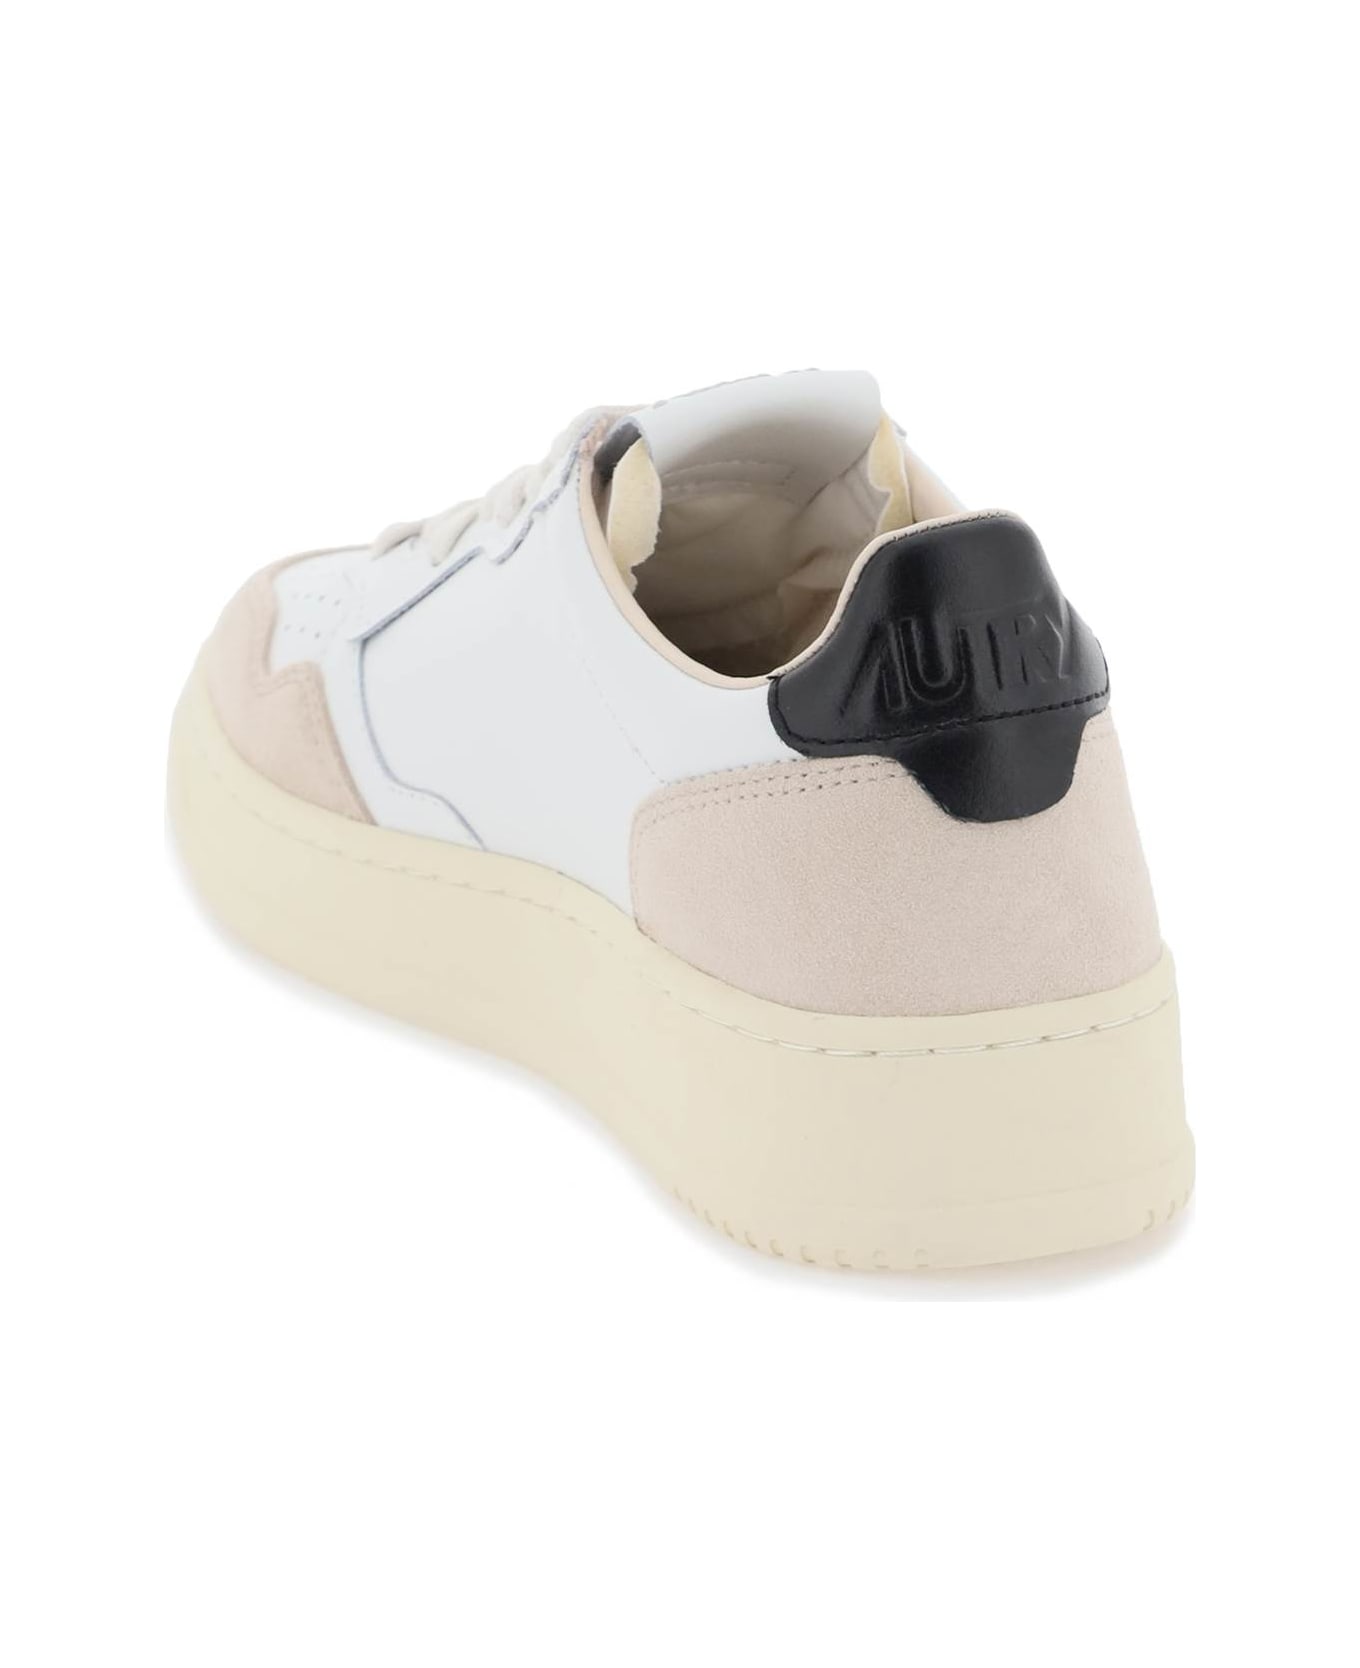 Autry Medalist Leather Low-top Sneakers - White